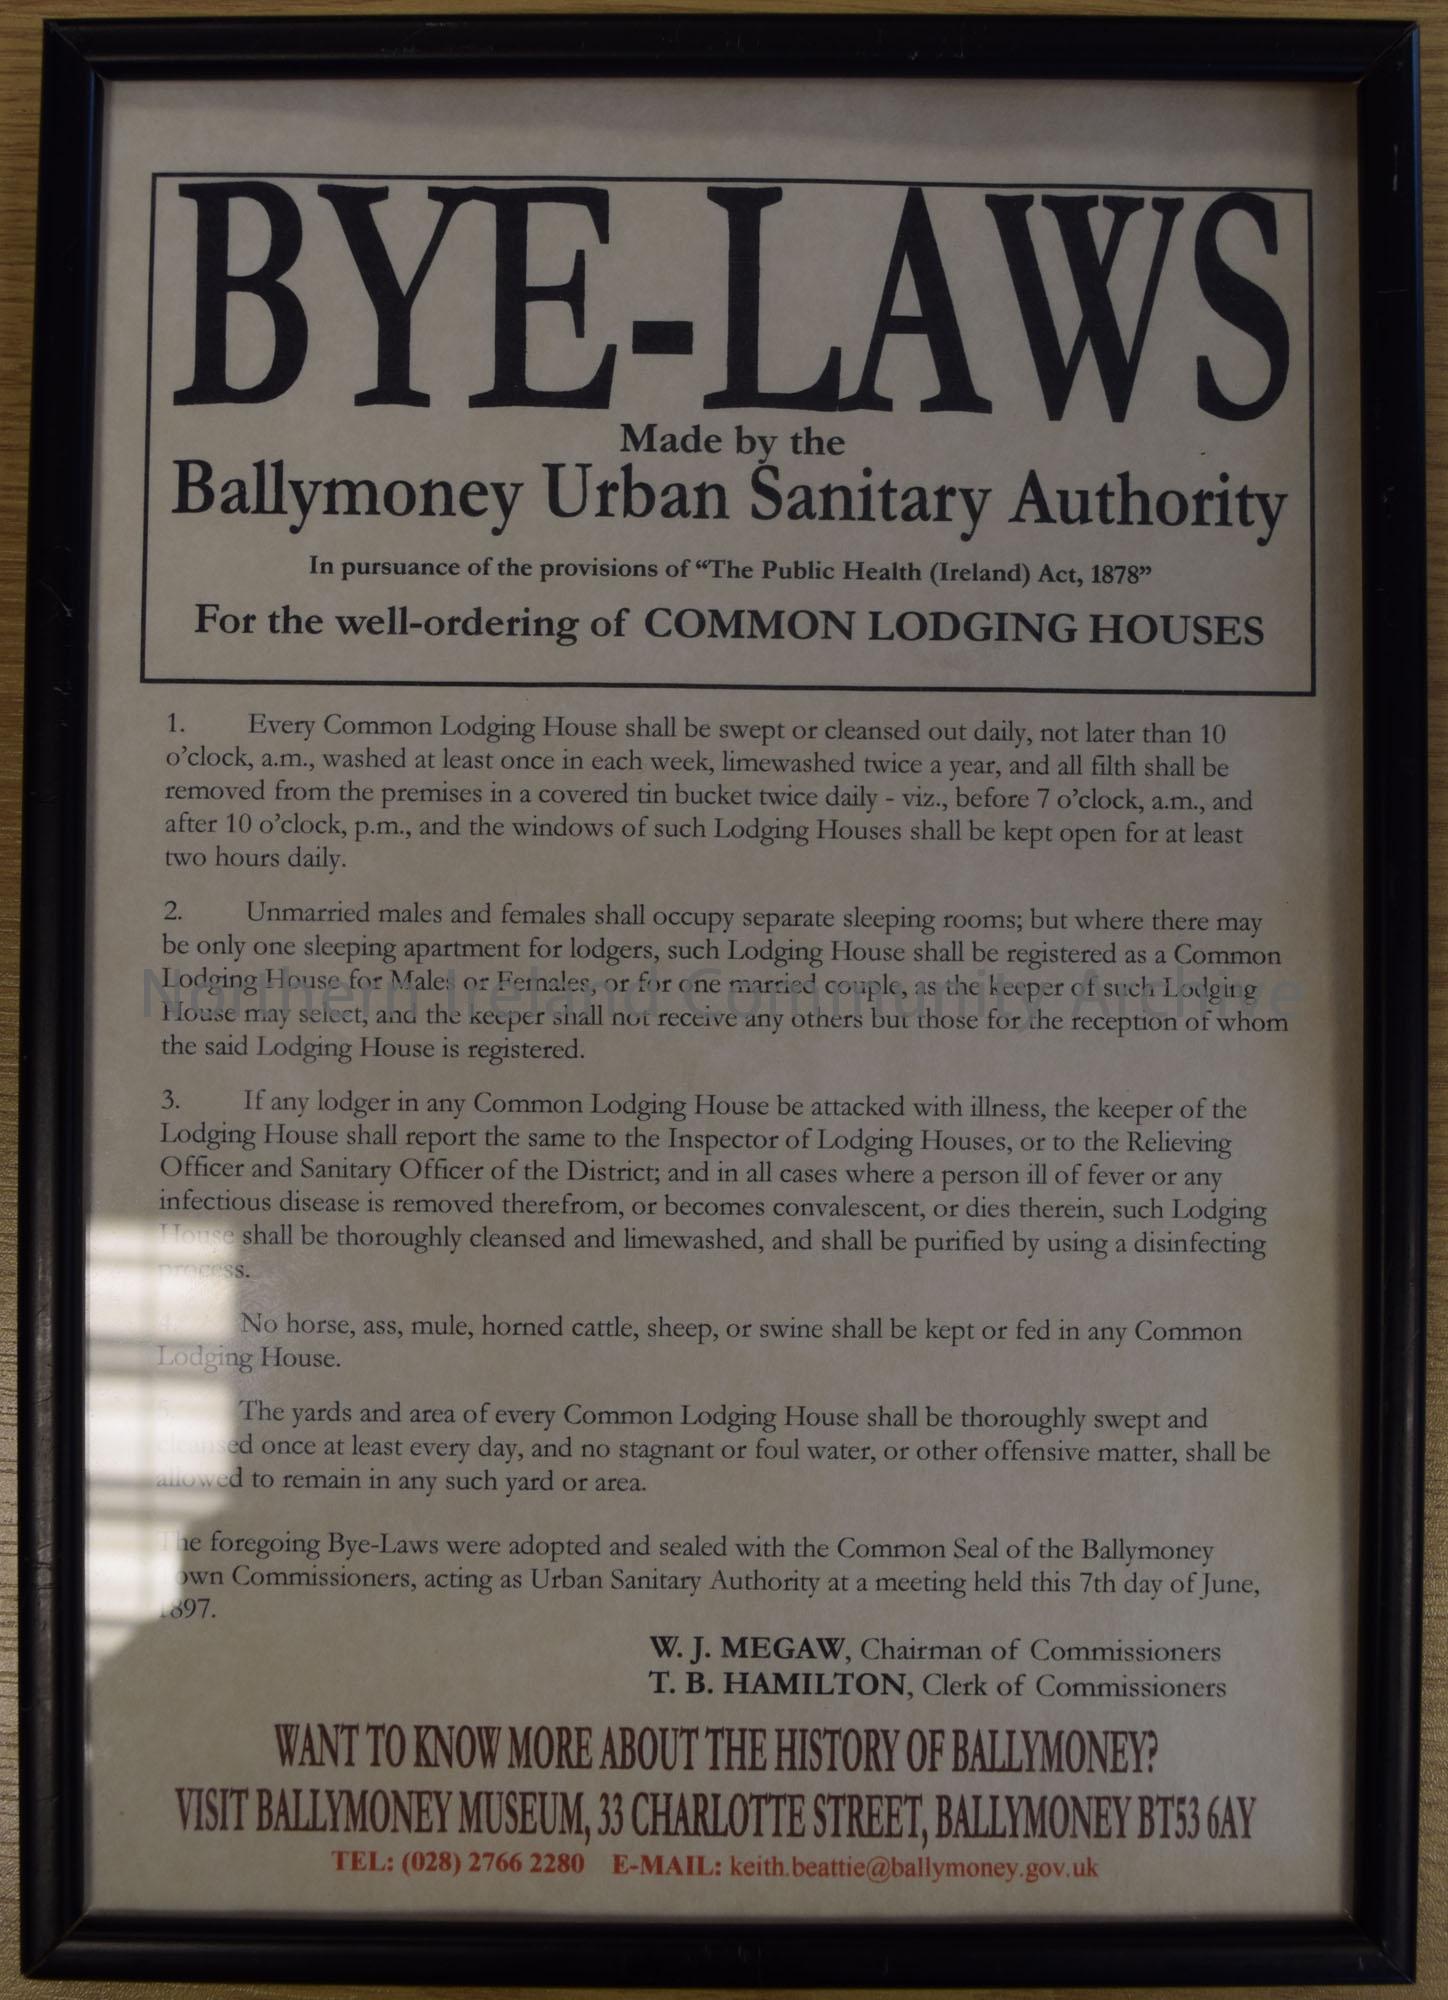 Bye-Laws made by Ballymoney Urban Sanitary Authority, in pursuance of the provisions of ‘The Public Health (Ireland) Act, 1887’ for the well-ordering …